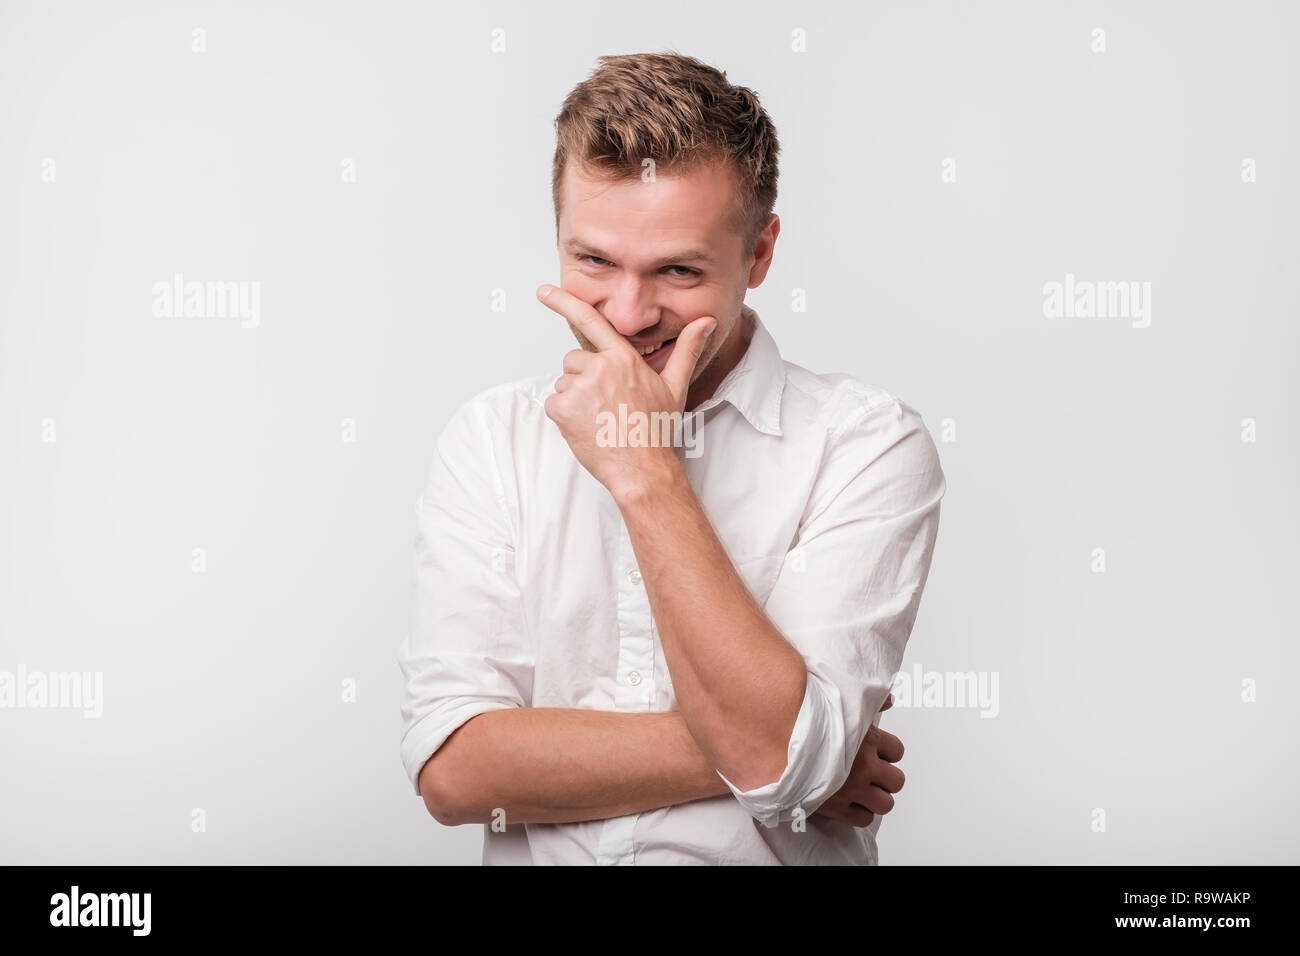 Mature man laughing and covering his mouth with hand over white background. Stock Photo